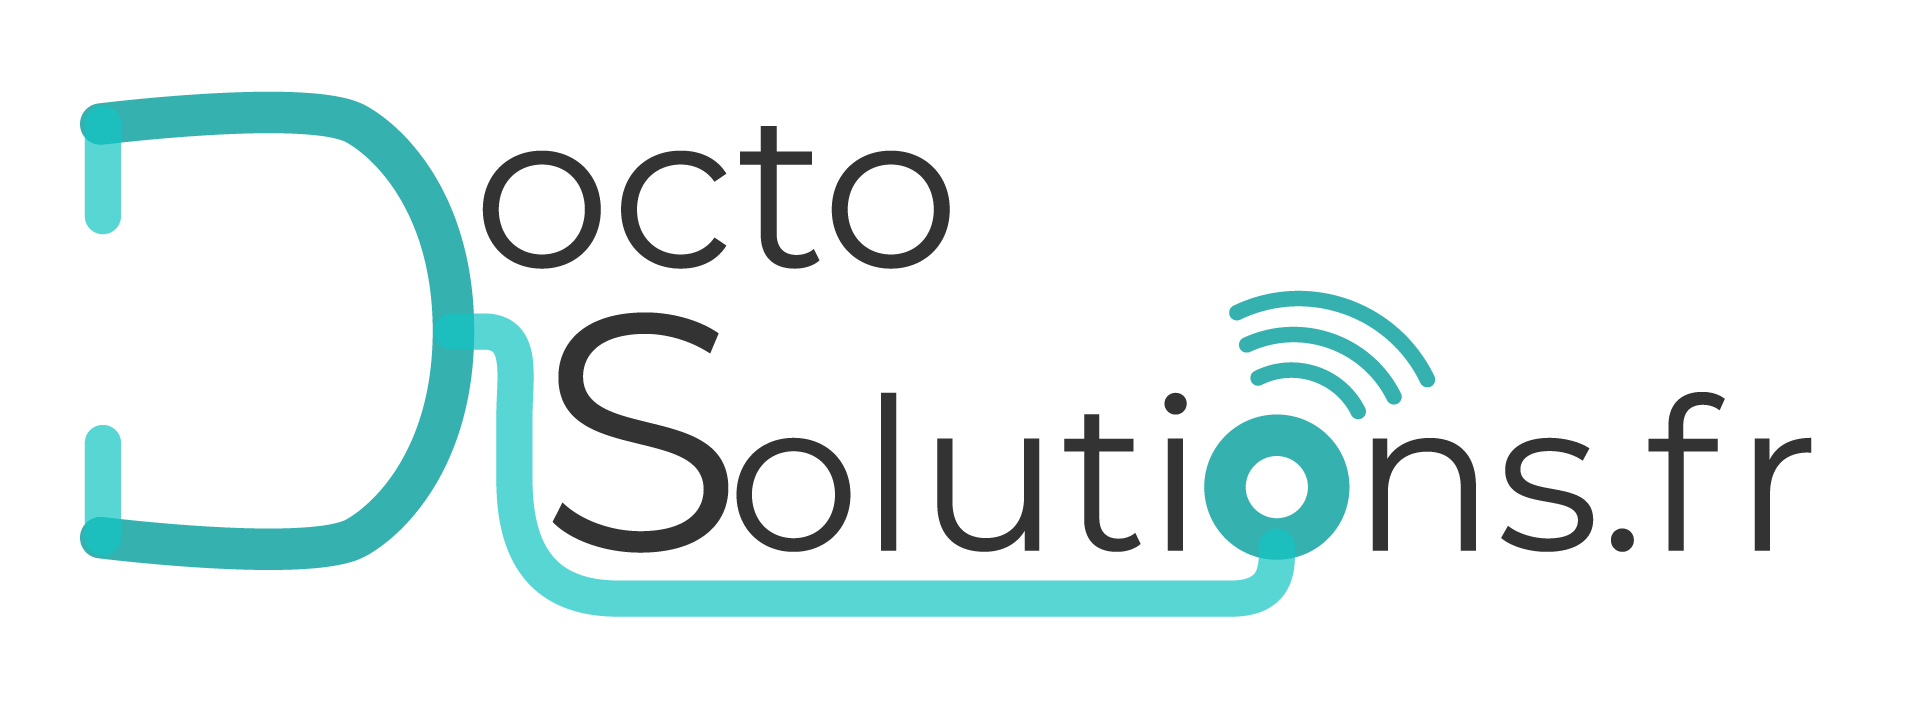 Doctosolutions